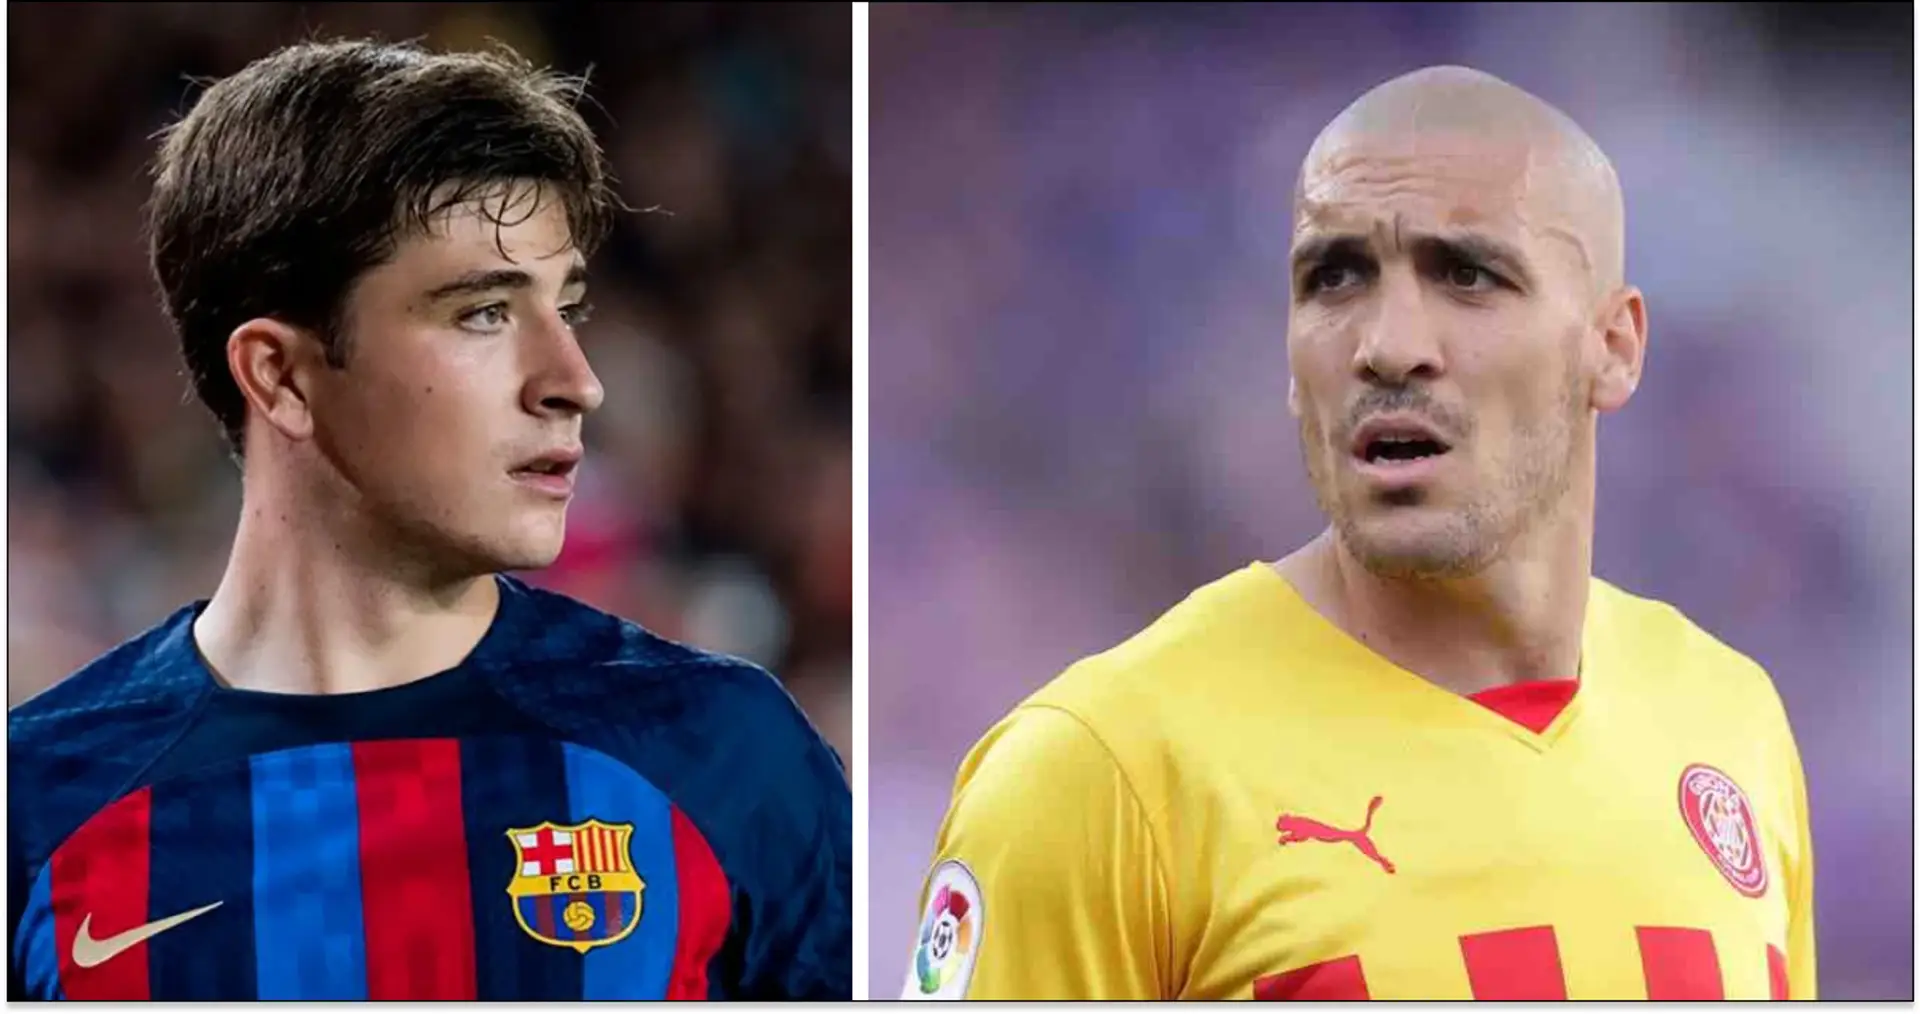 Barca could send player to Girona in exchange for Romeu — Torre & 3 other candidates named (reliability: 4 stars)